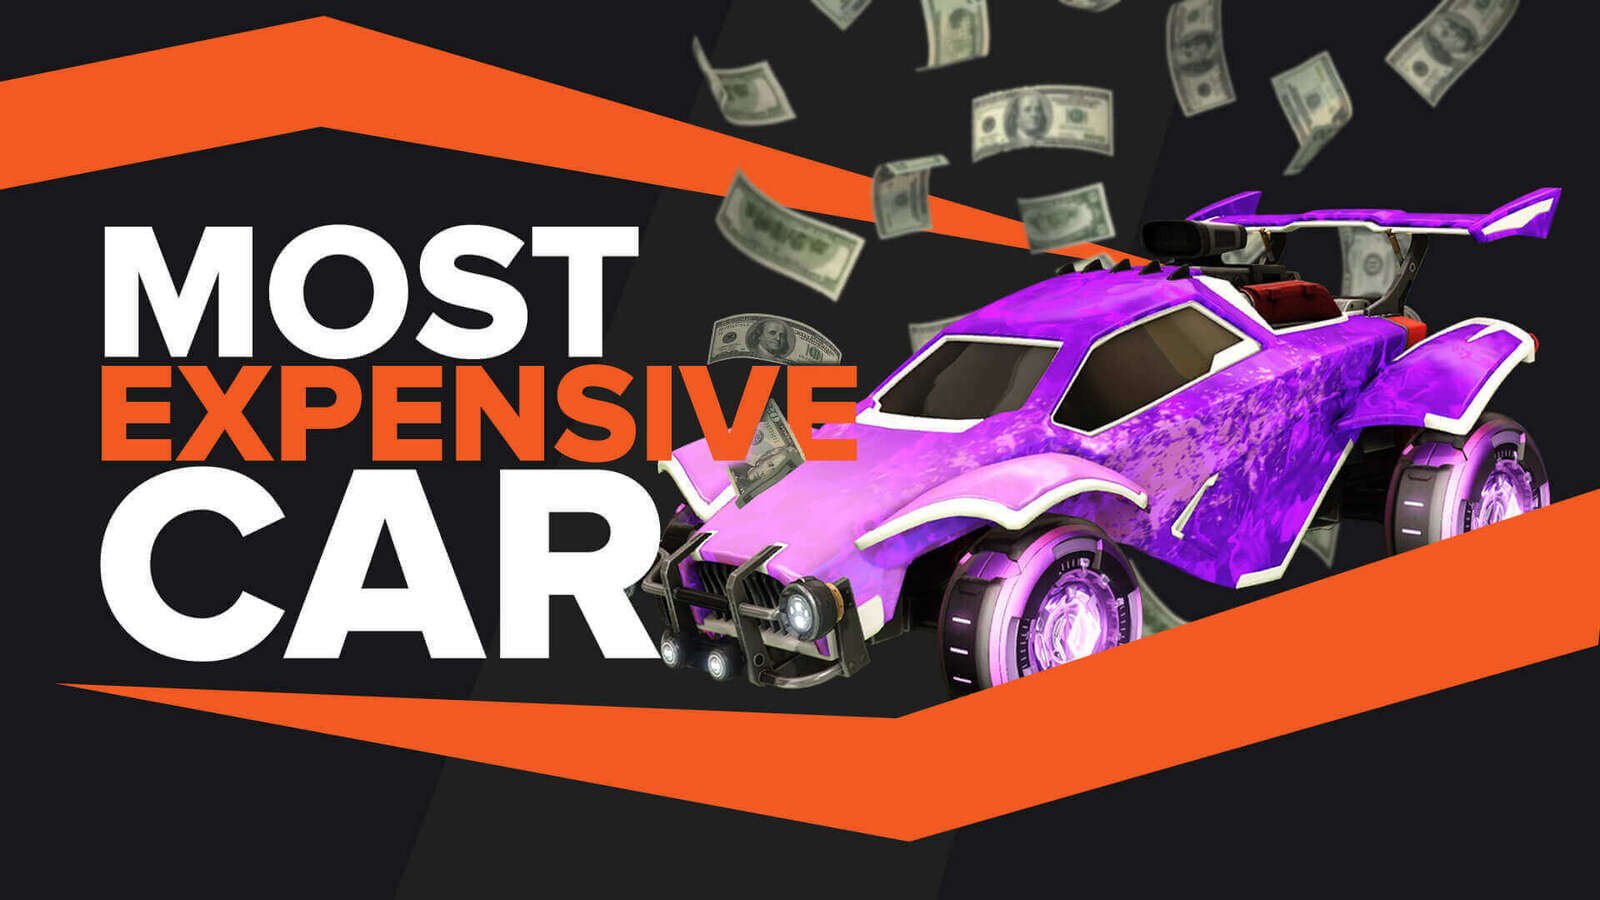 Building The Most Expensive Car In Rocket League: What Does It Cost? [2022 Updated]